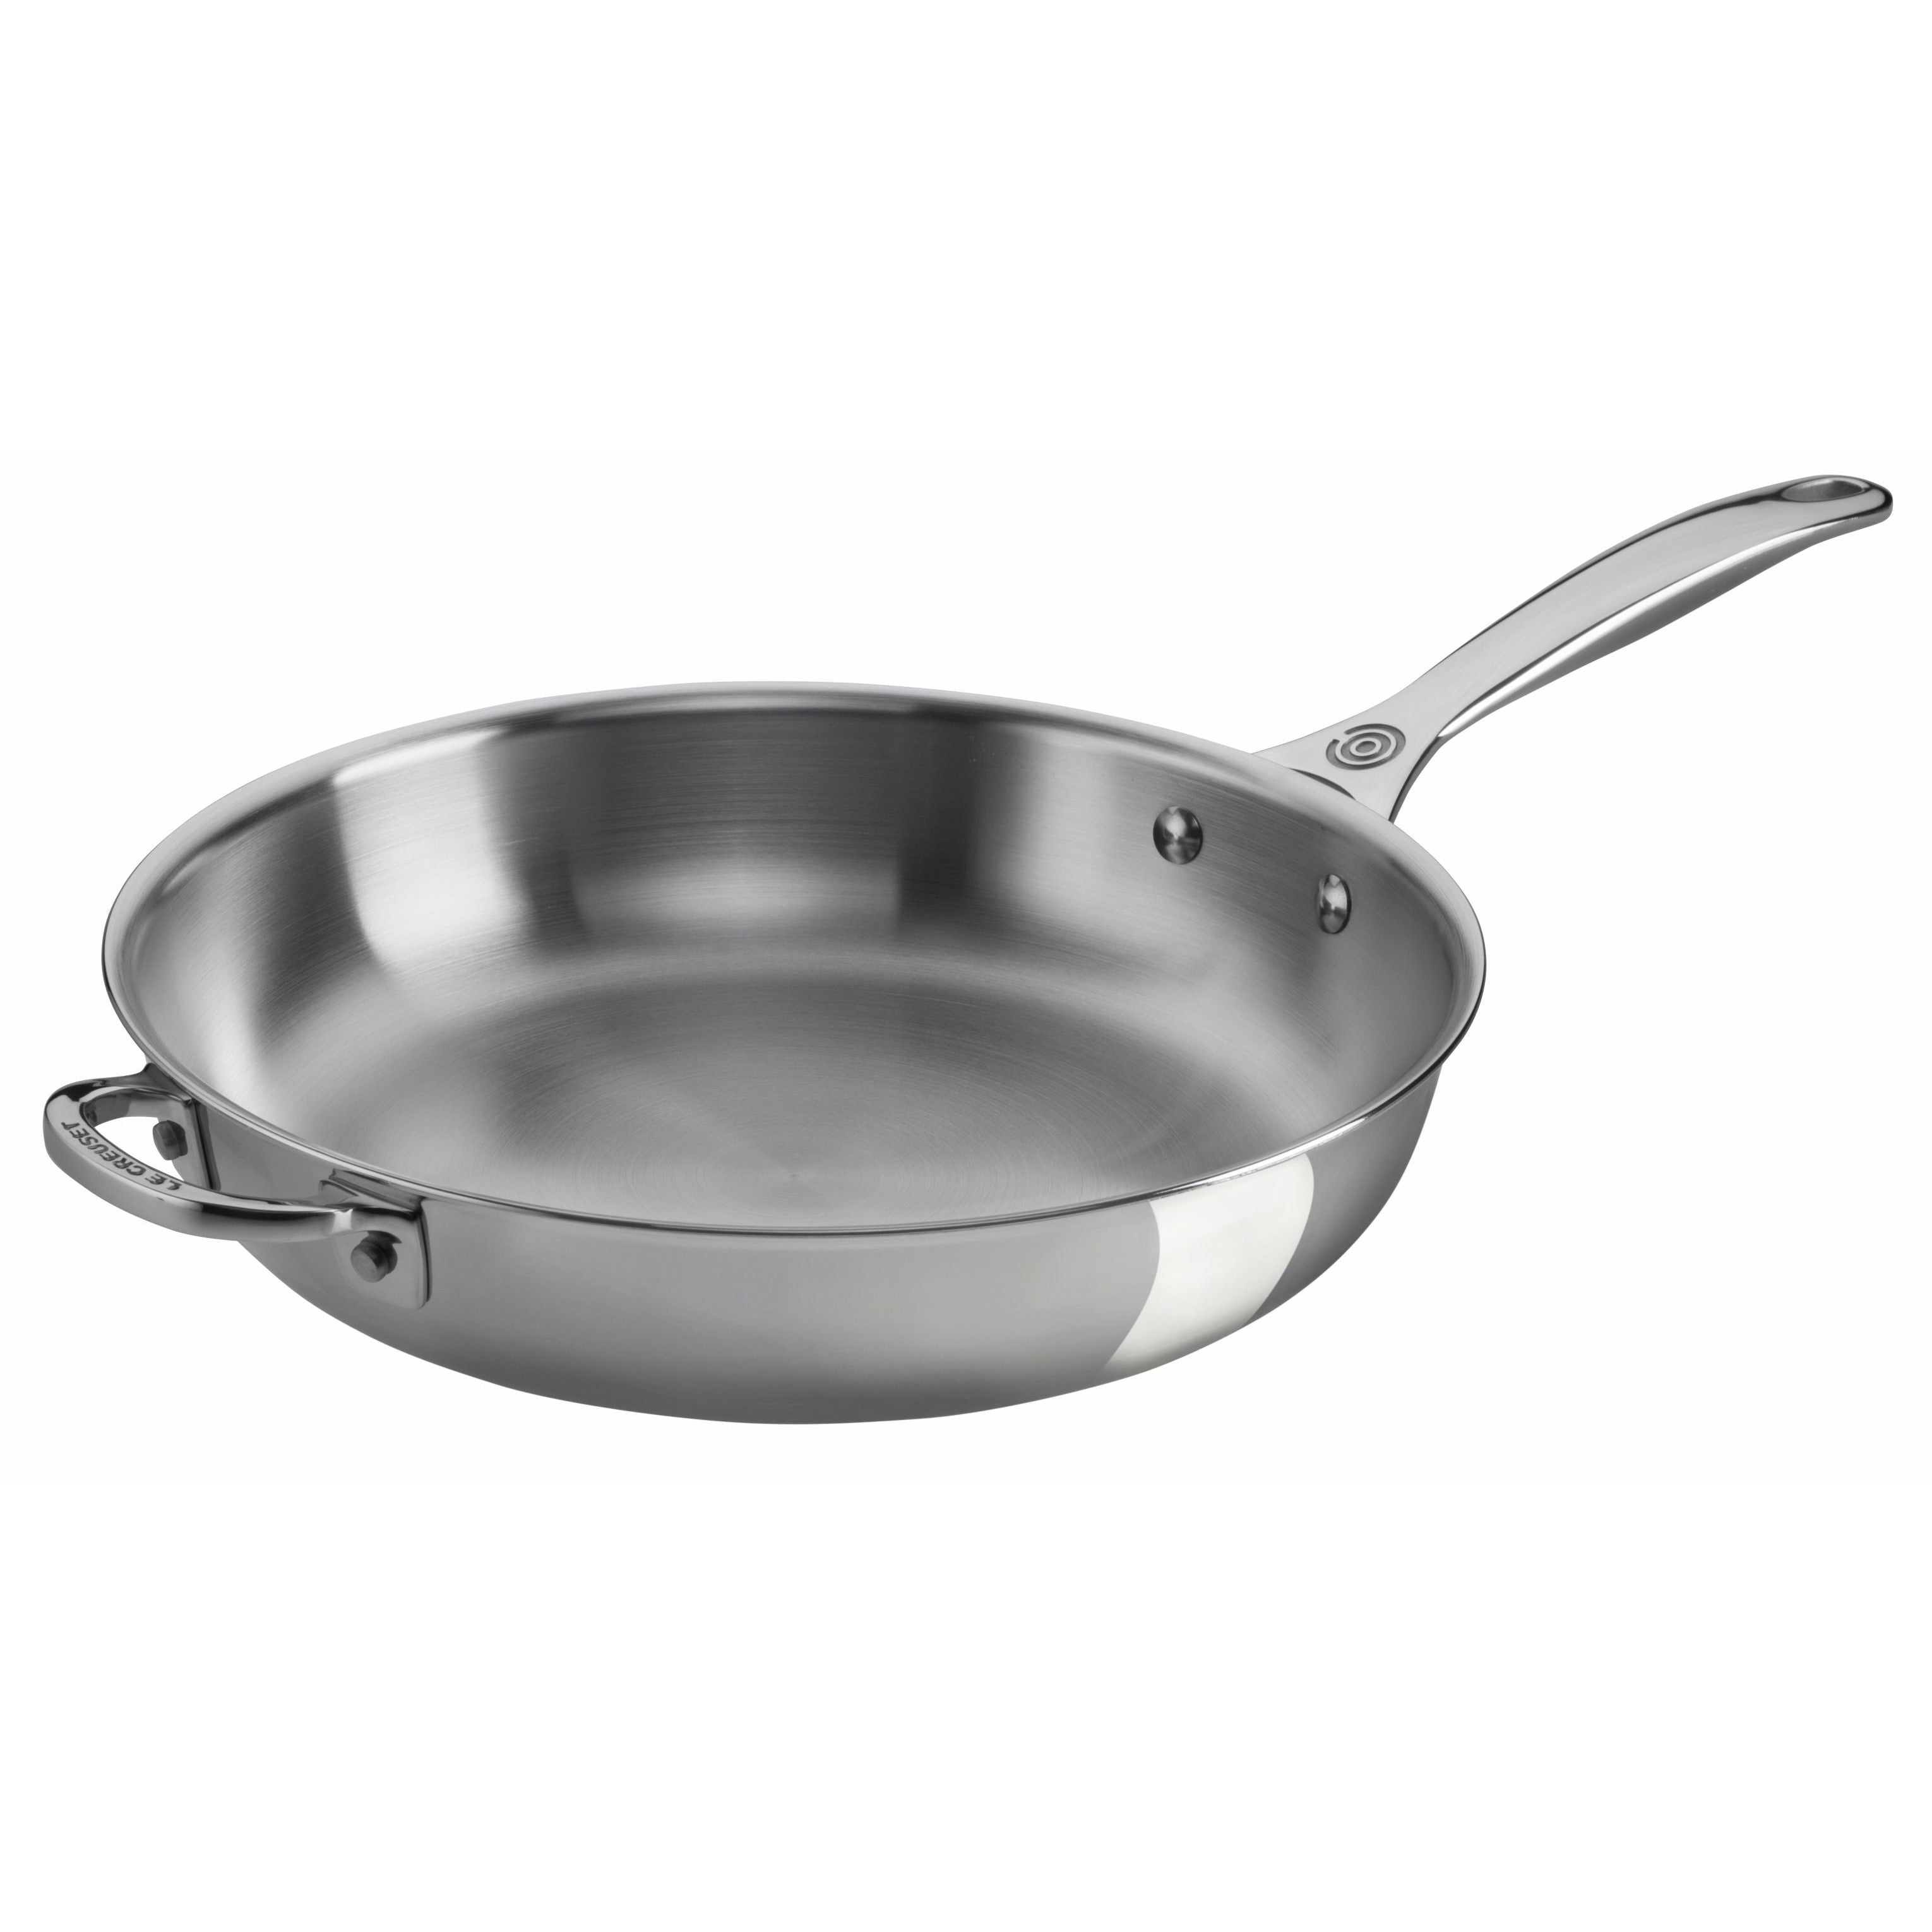 Le Creuset Signature Stainless Steel Uncoated Frying Pan With Helper Handle, 28 Cm